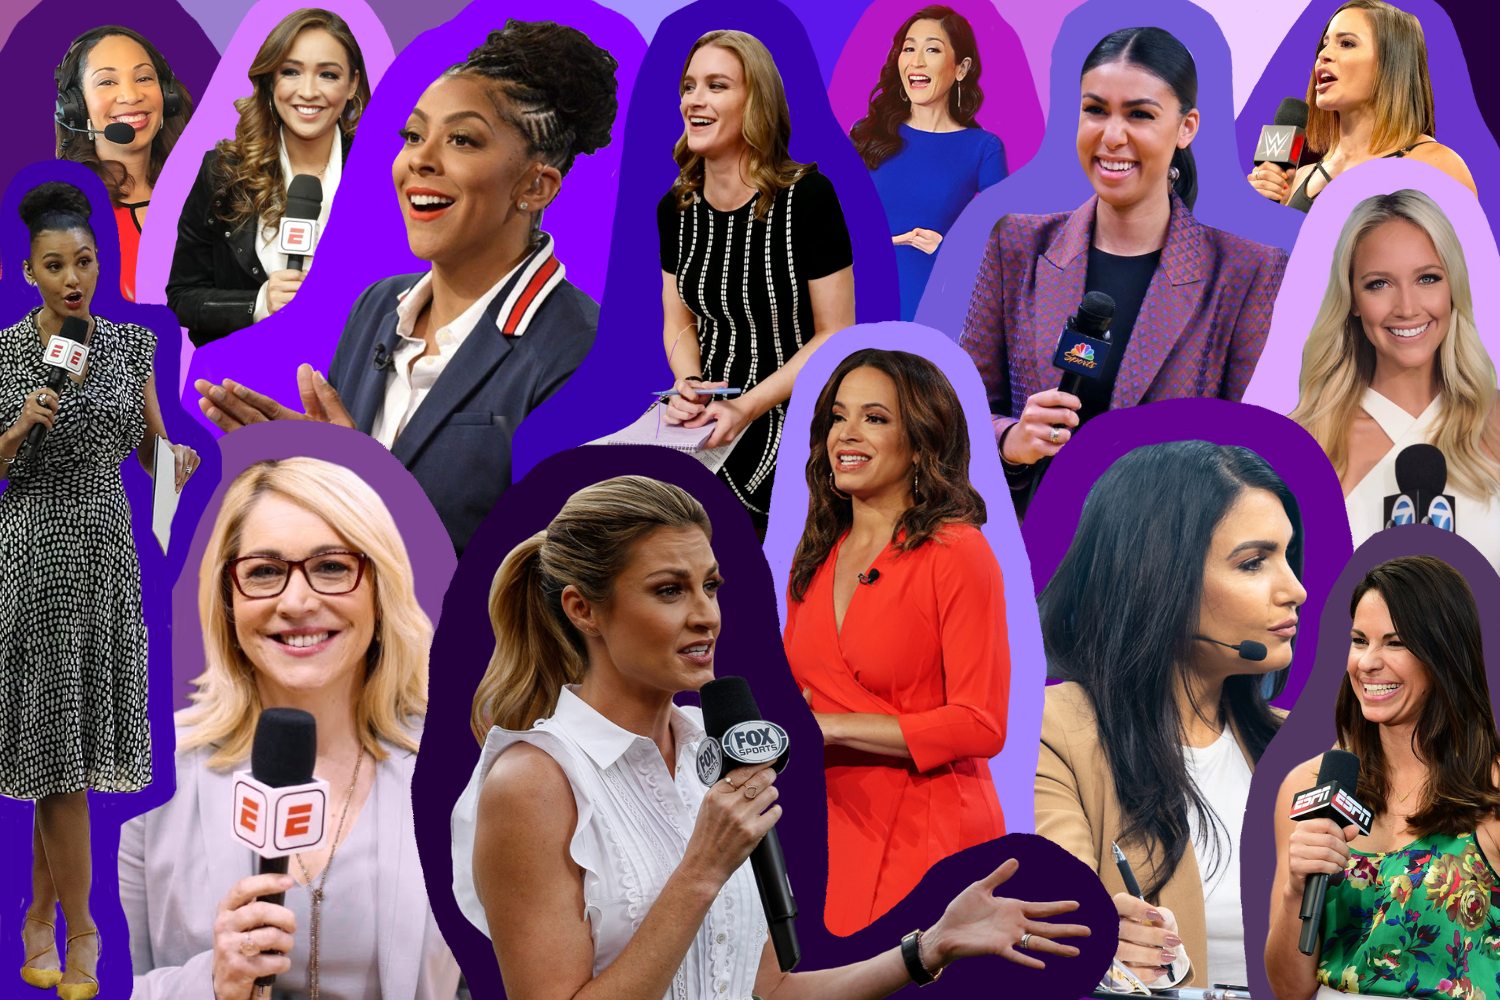 Female sports journalists still face rampant sexism on the job